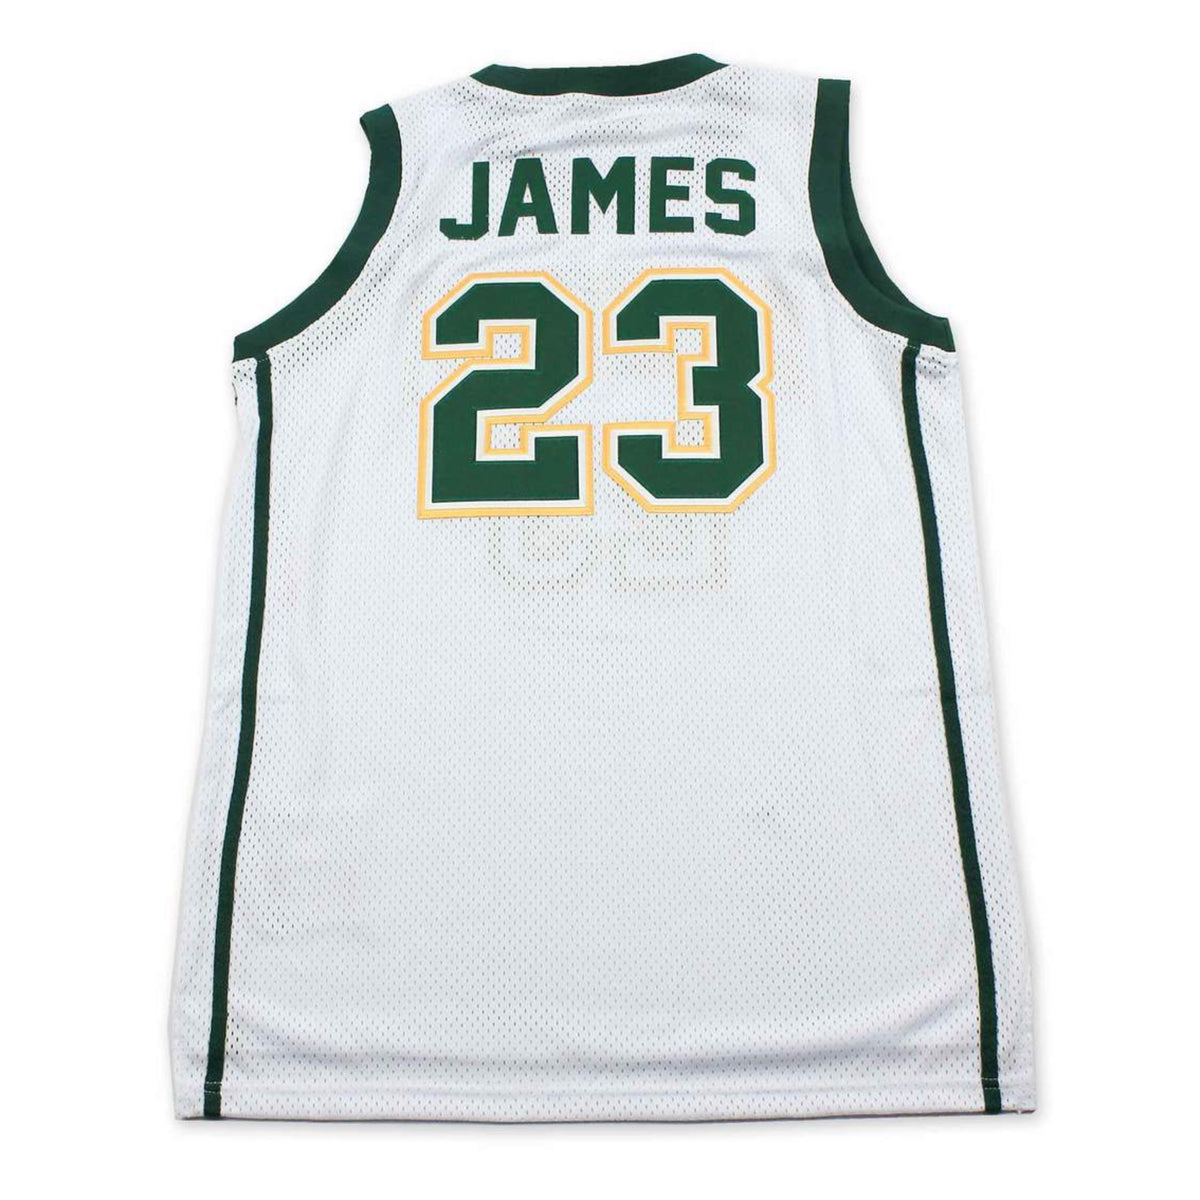 LeBron James St. Vincent-St.Mary Talented and Gifted Green Swingman Jersey